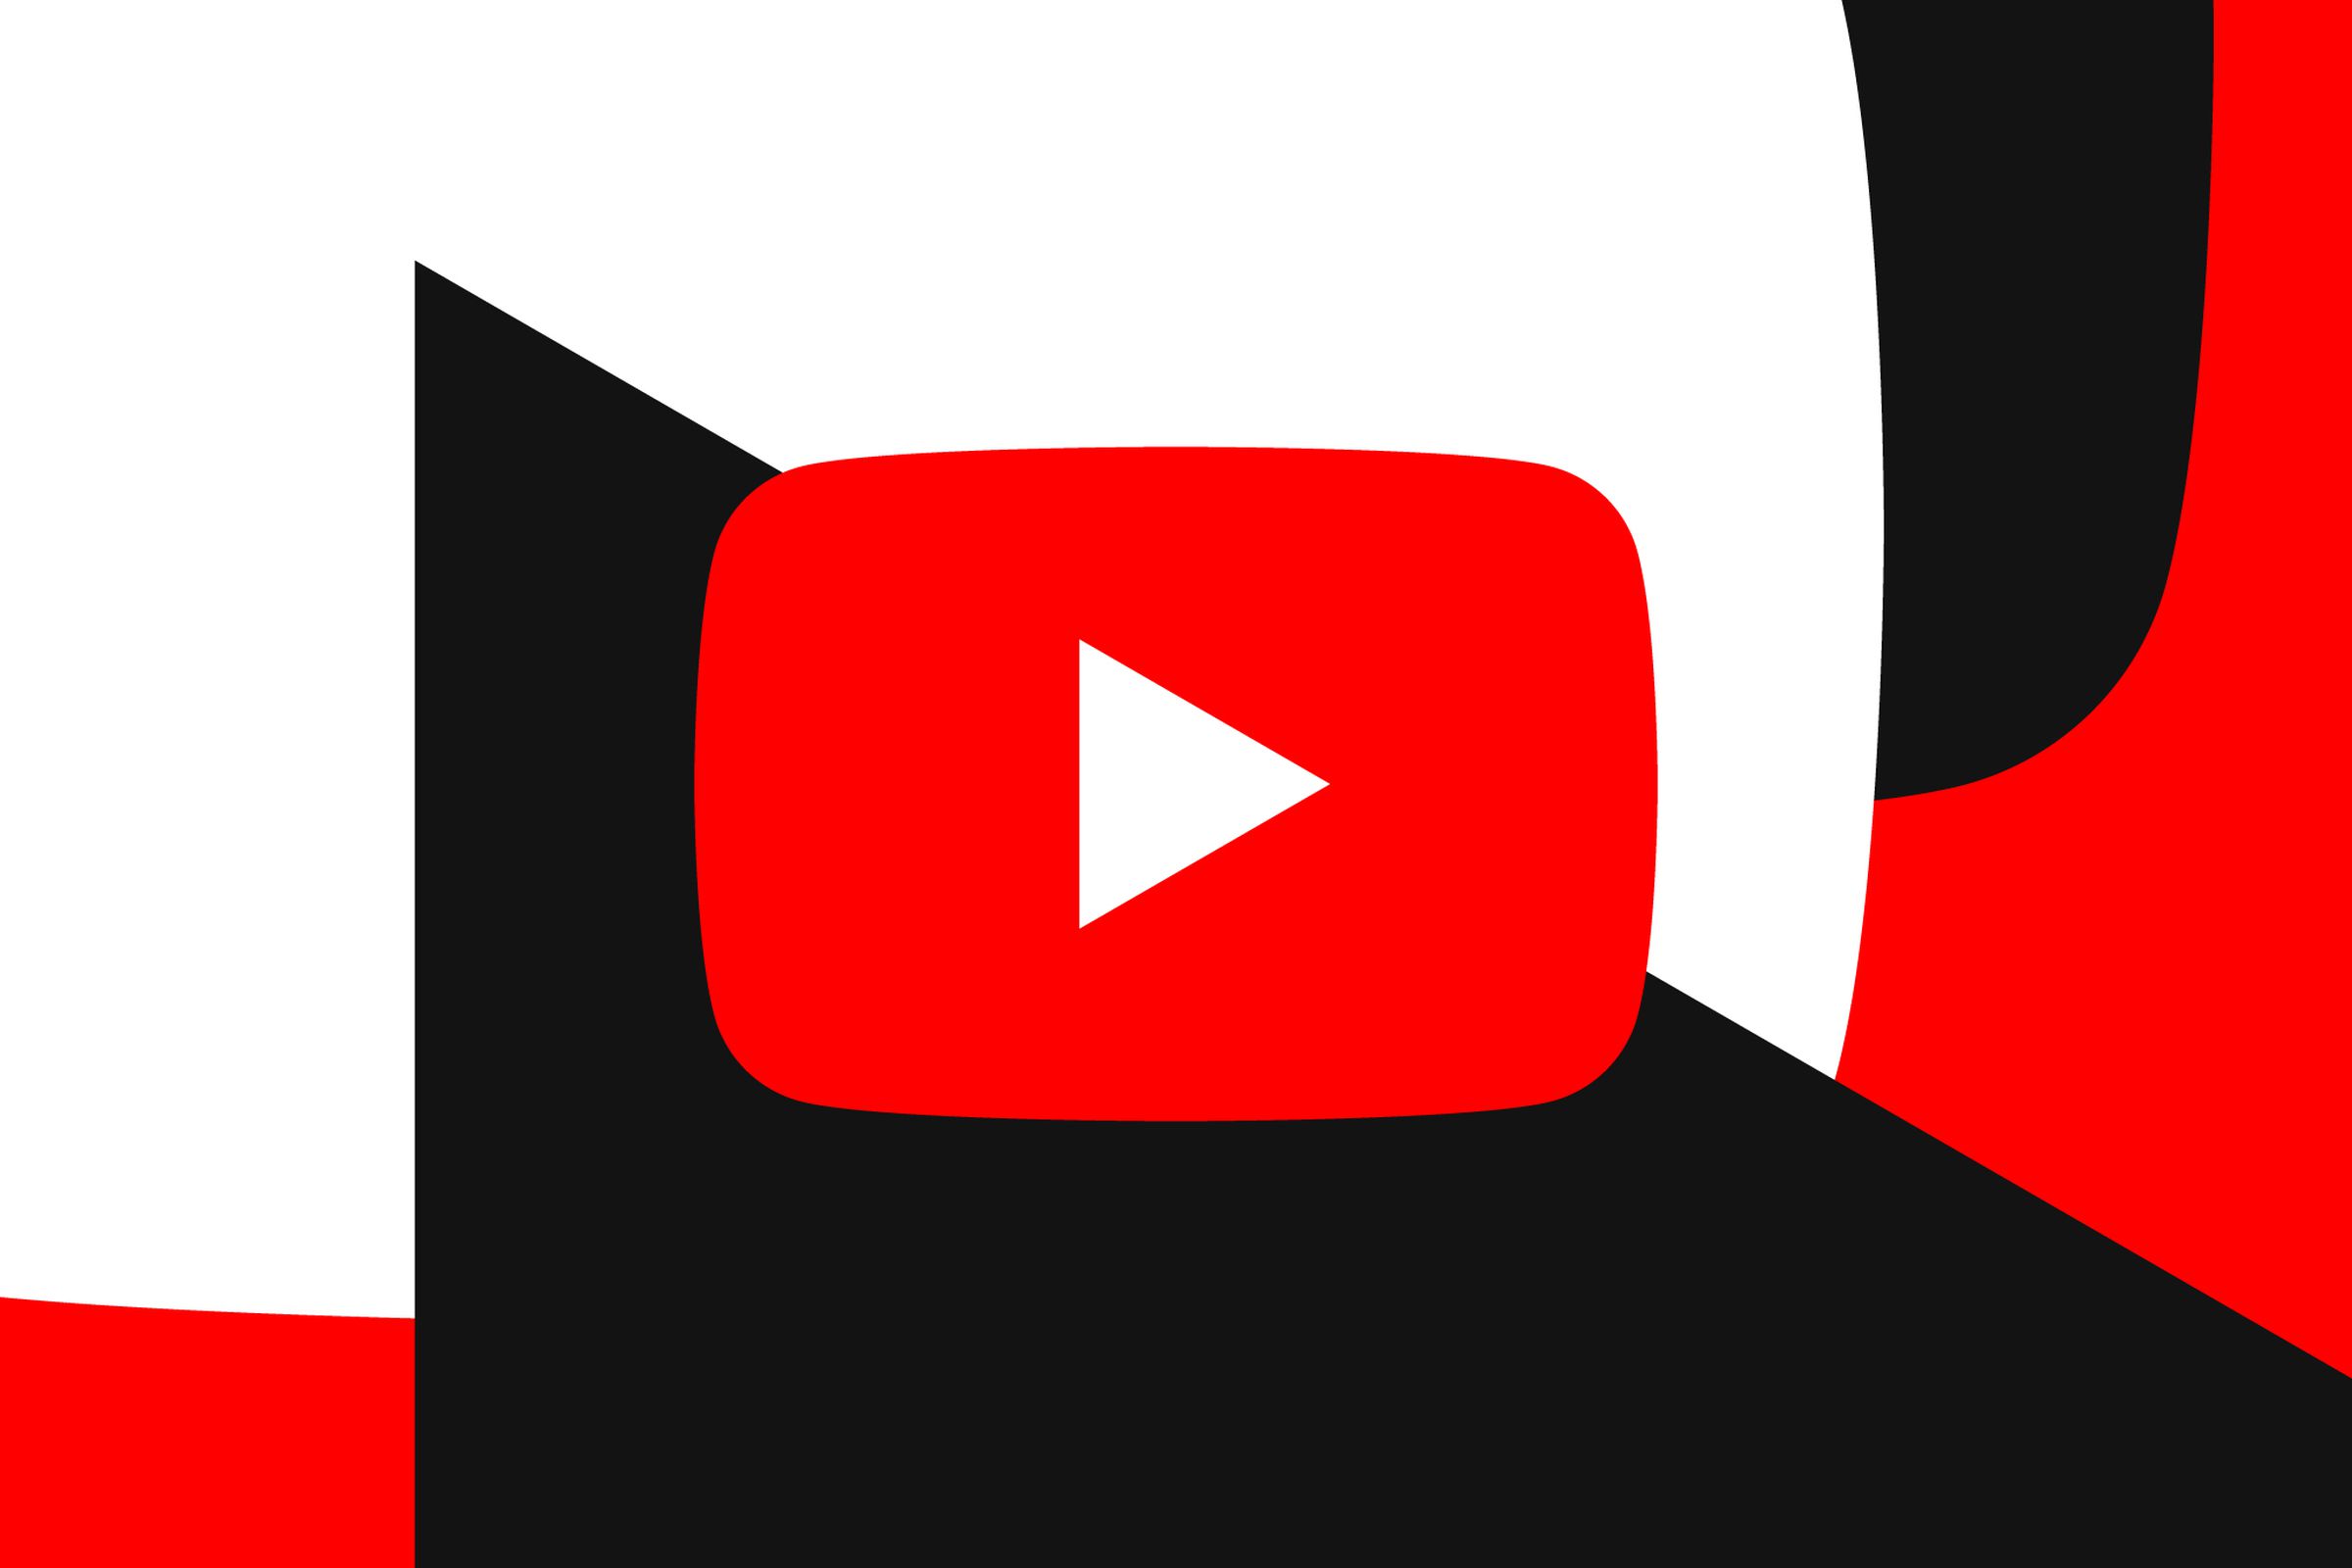 YouTube’s logo with geometric design in the background